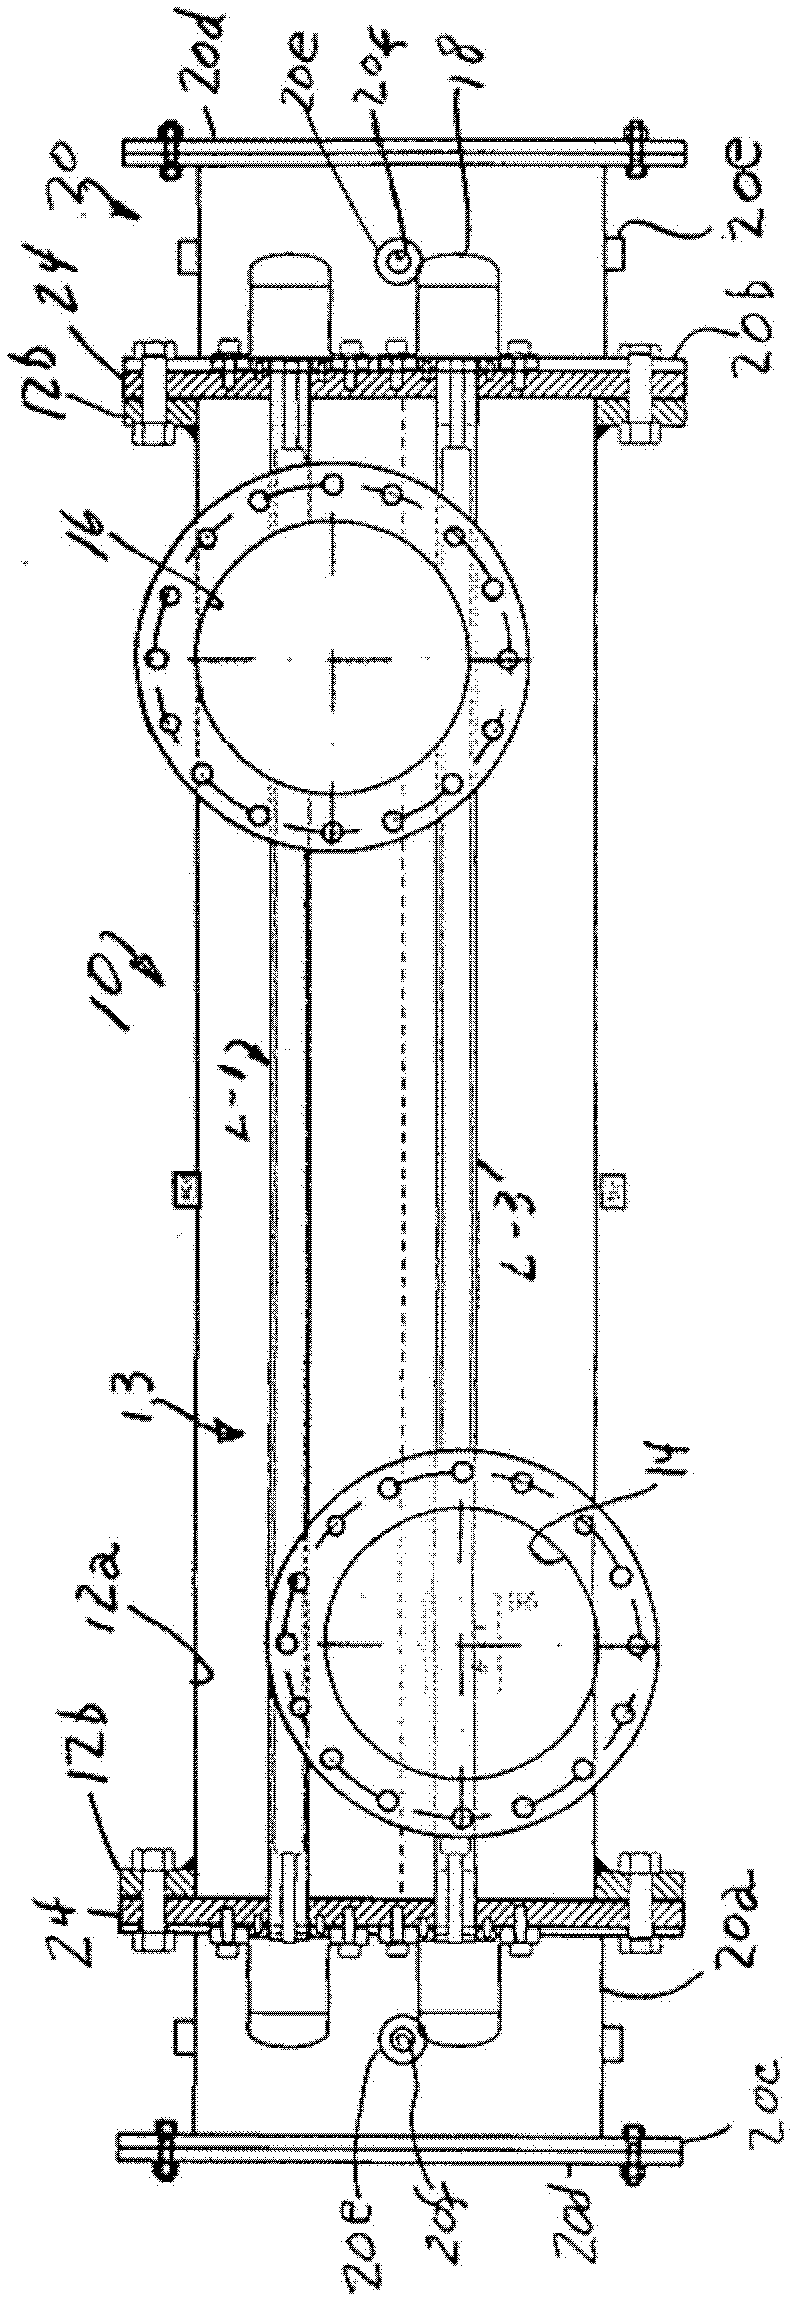 Apparatus for installation of ultraviolet system for ballast water treatment in explosive atmosphere of shipboard pump rooms and offshore platforms